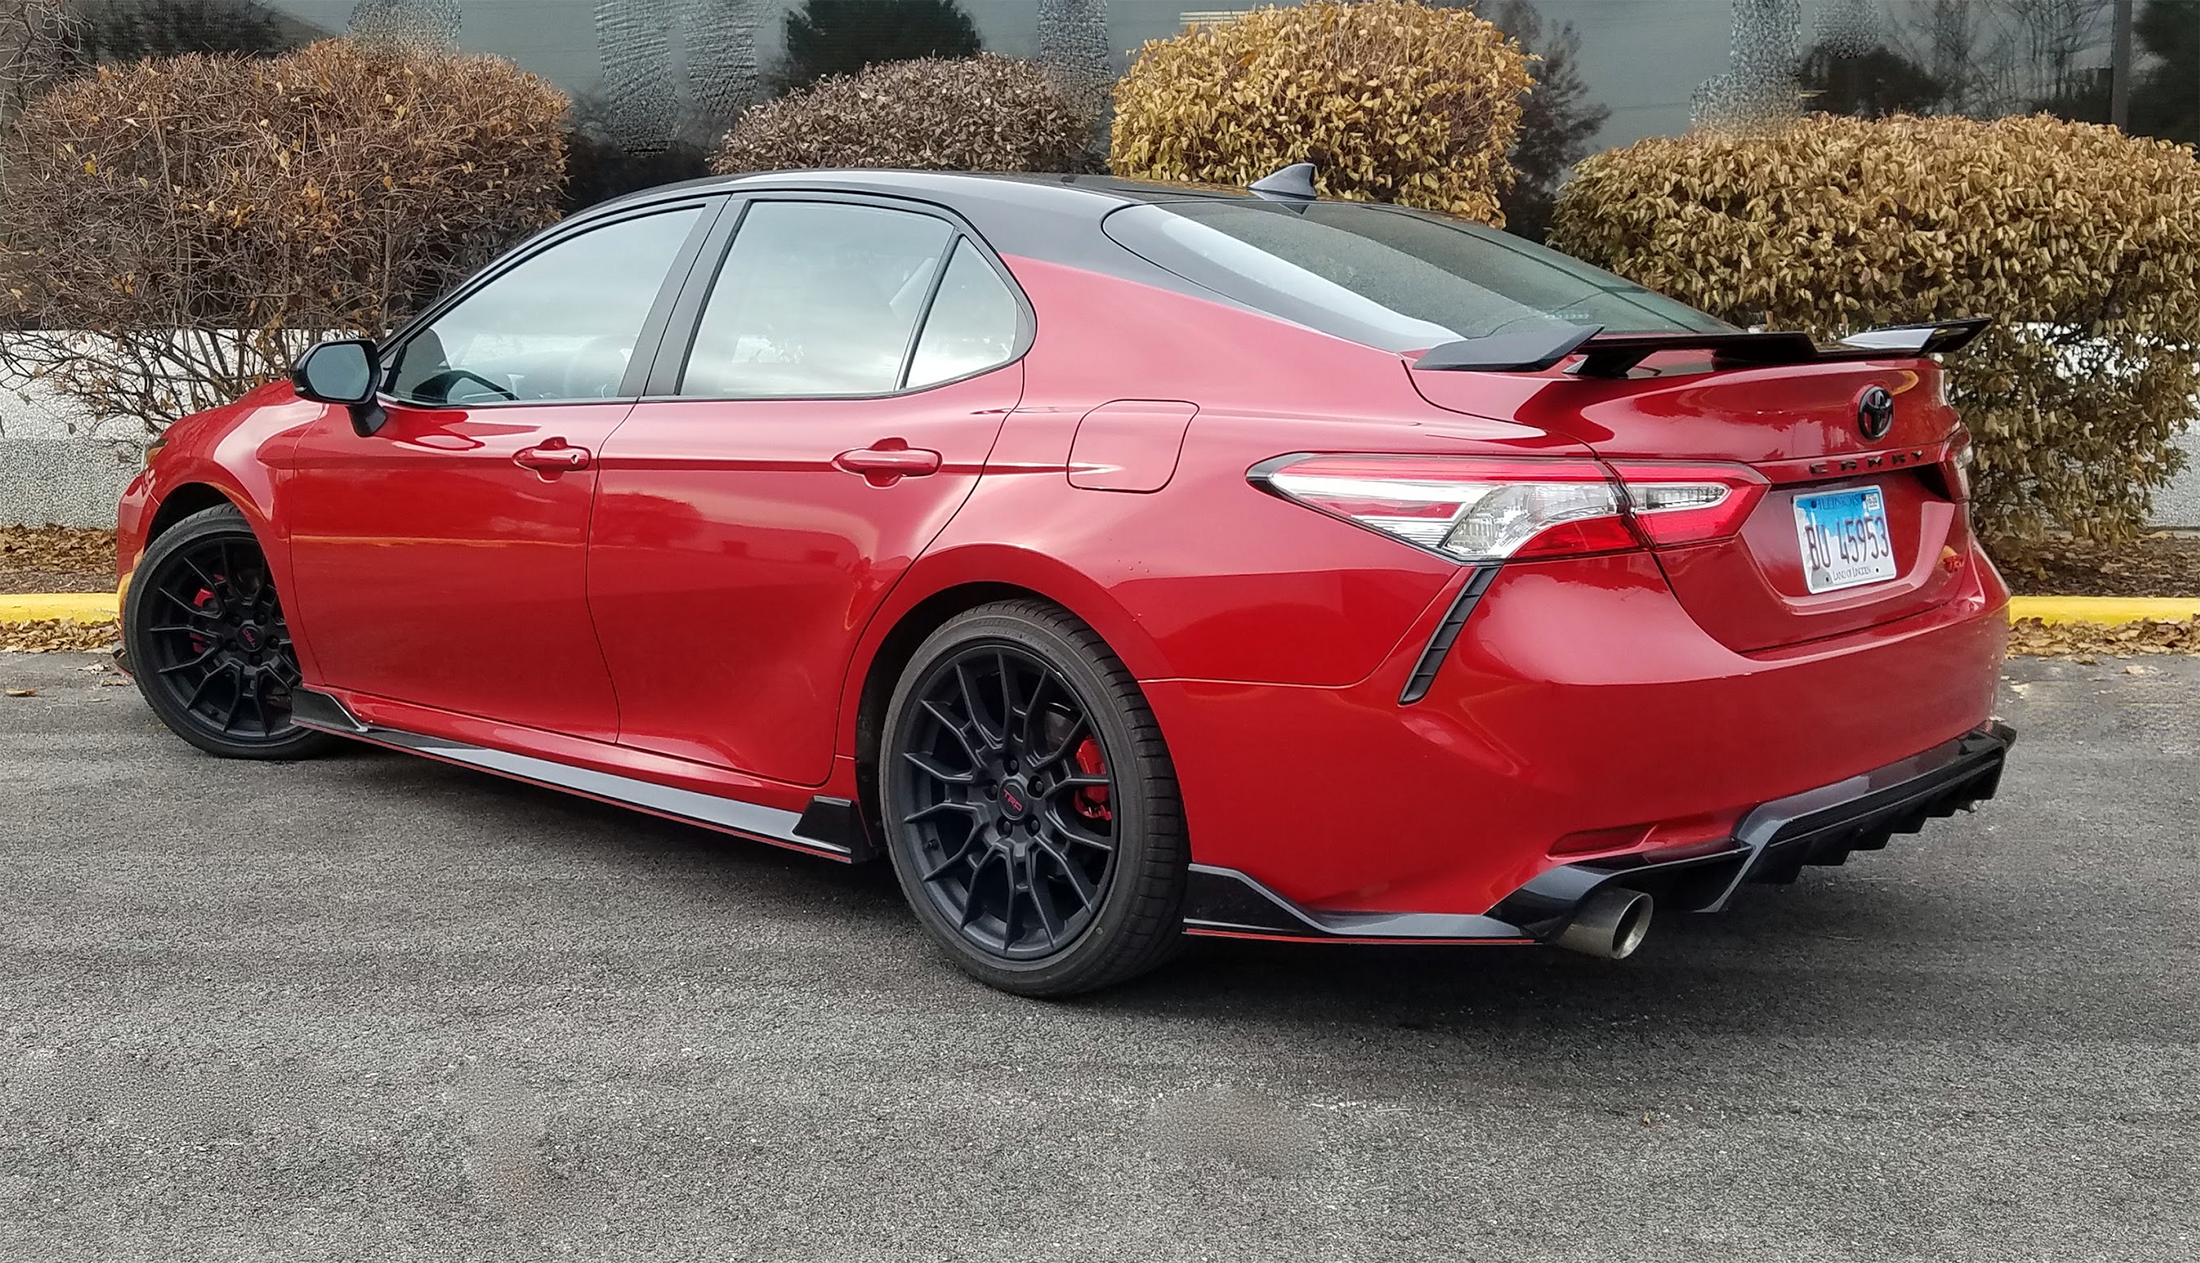 2020 Toyota Camry TRD in Supersonic Red 